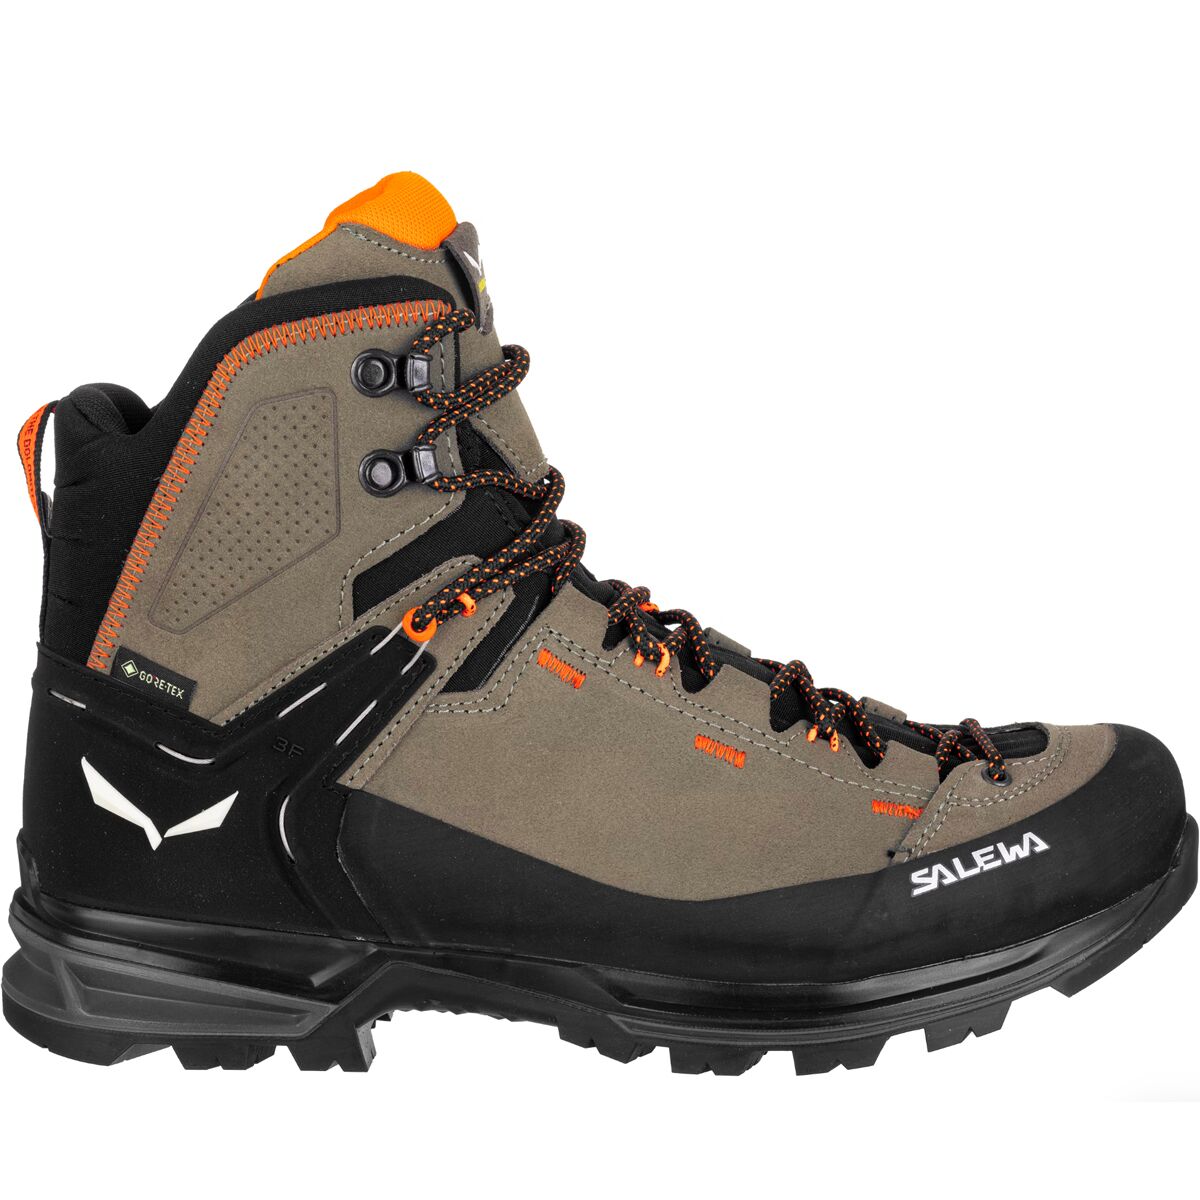 Salewa Mountain Trainer 2 Mid GTX Backpacking Boot - Men's